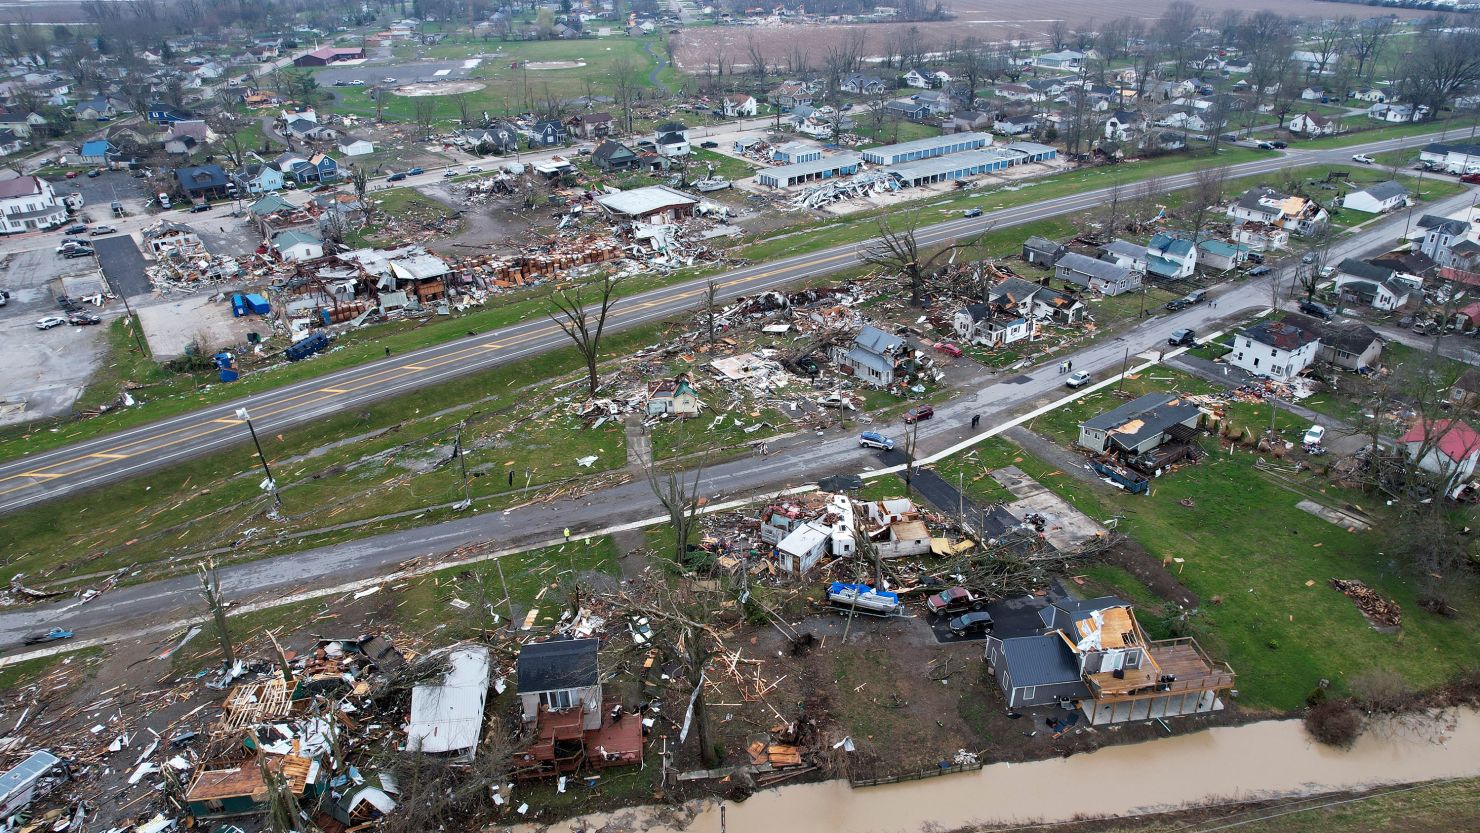 Debris scattered on the ground near damaged homes following a severe storm Friday in Lakeview, Ohio.